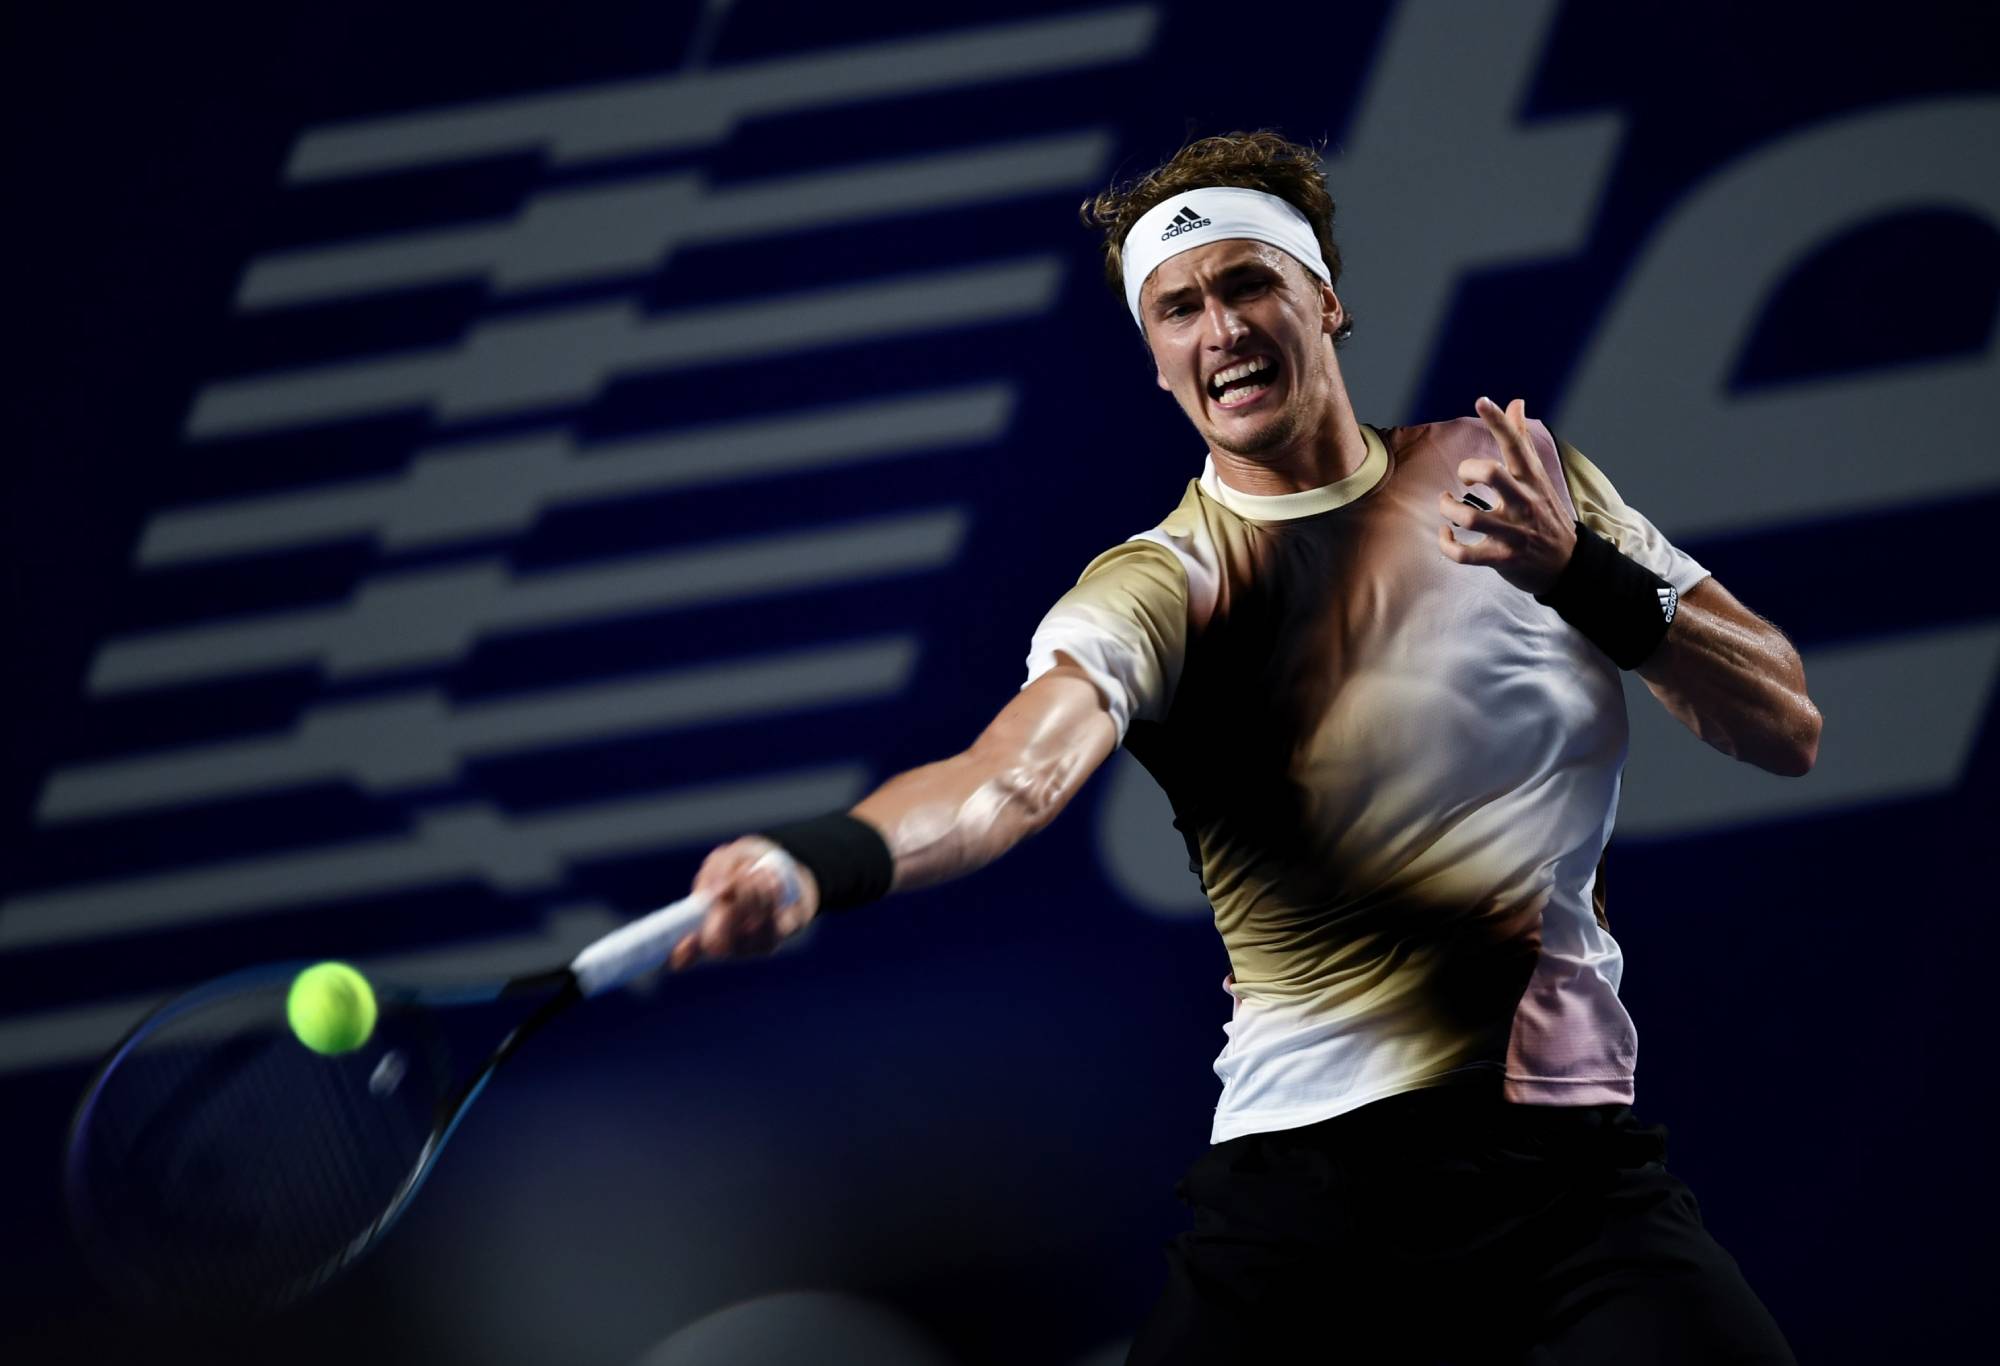 Alxander Zverev at the Mexican Open. (Getty Images)